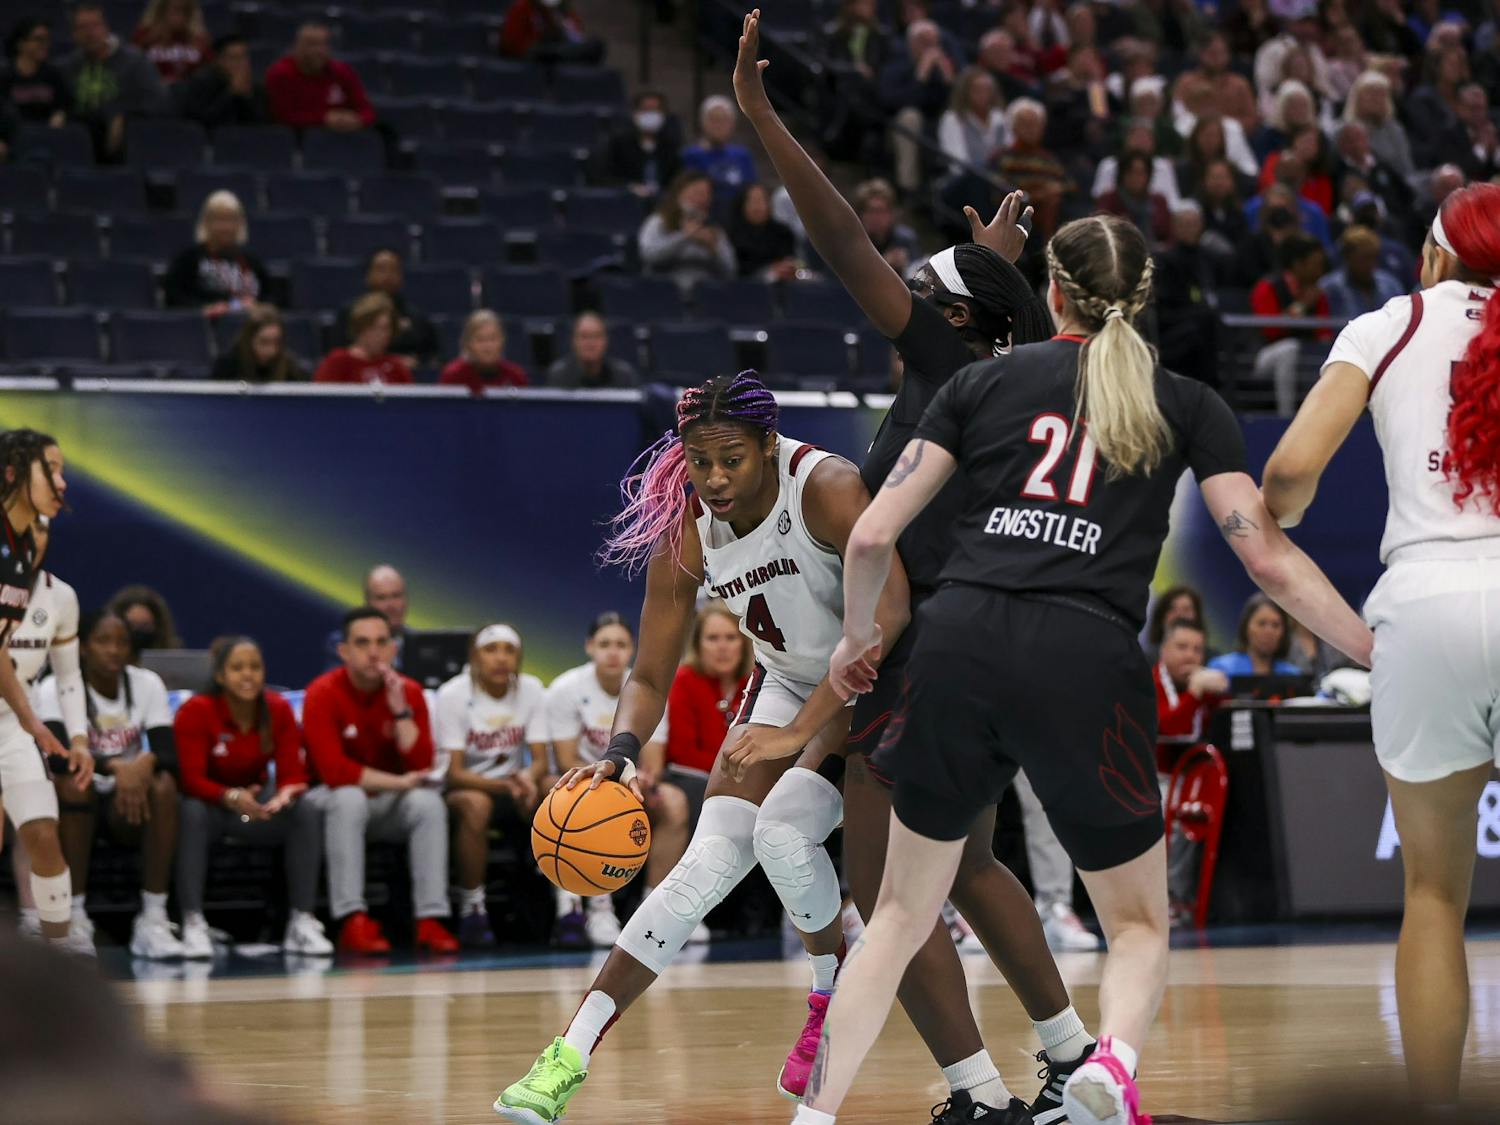 Junior forward Aliyah Boston pushes the ball past defenders during the first quarter of South Carolina's 72-59 victory over Louisville on April 1, 2022, advancing to the National Championship game.